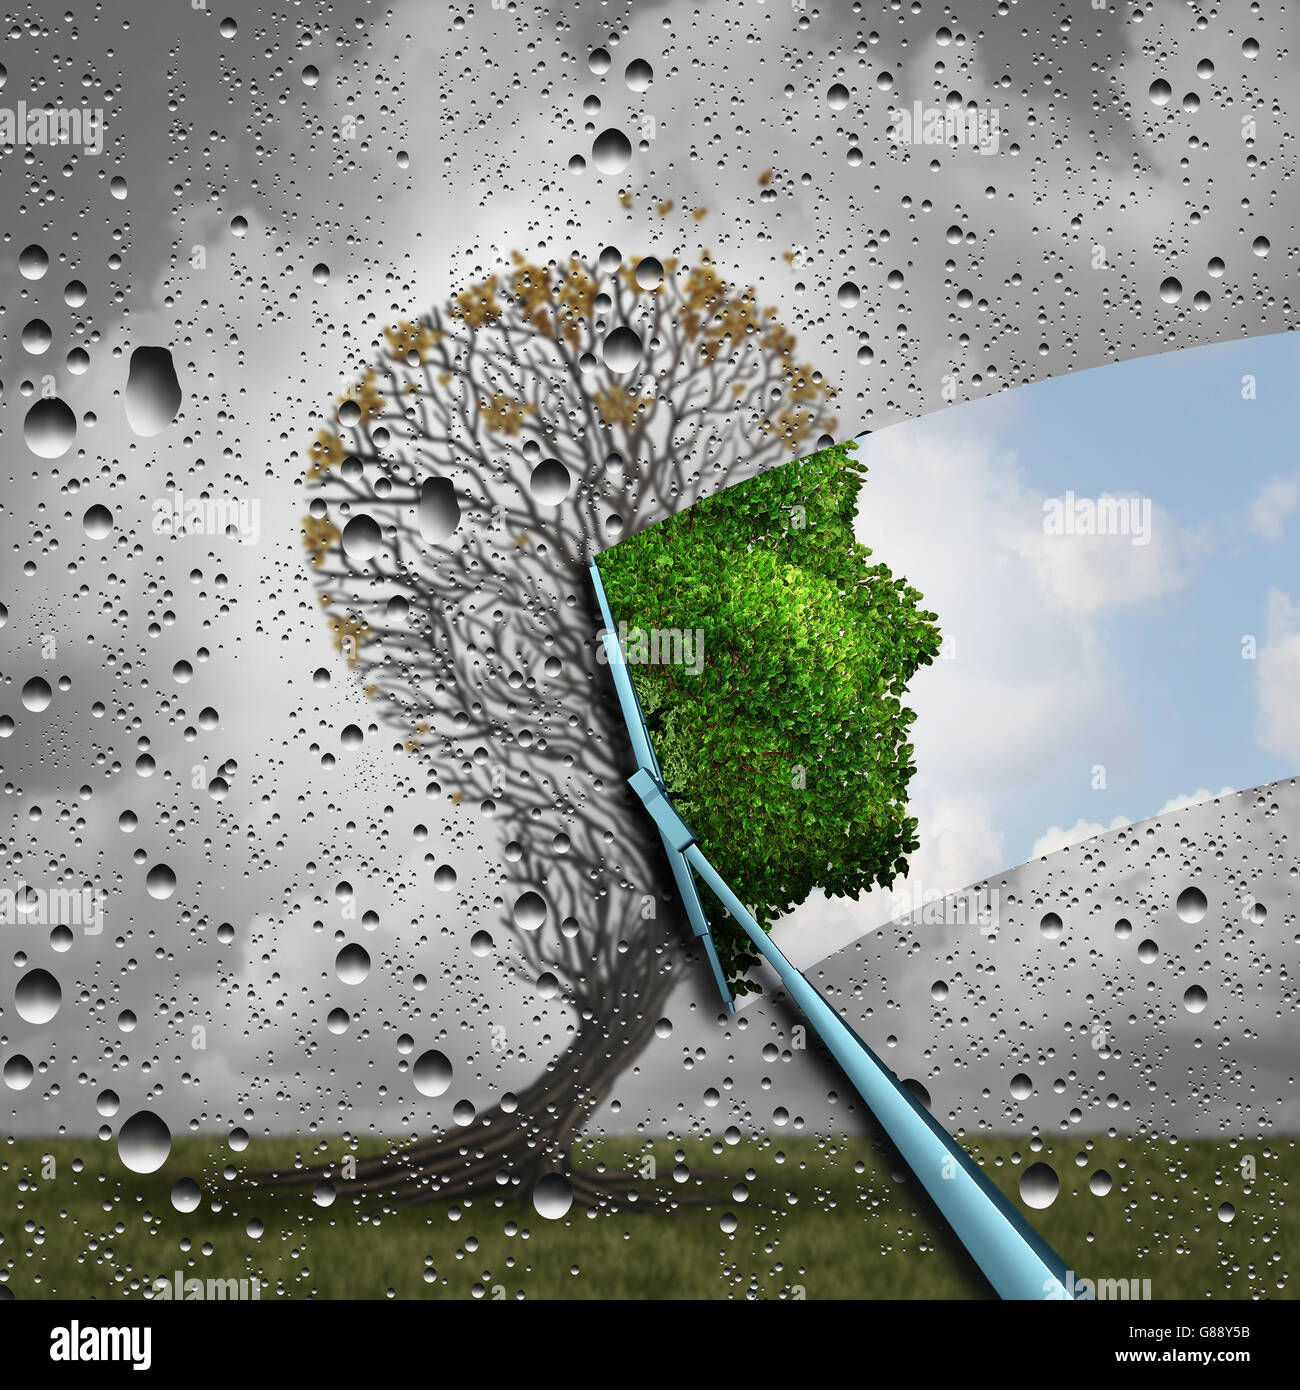 Reverse aging process and make young again medical concept or plastic surgery symbol as a wiper wiping away old decaying tree and revealing to a healthy green human head plant with leaves as a medical metaphor for renewal with 3D illustration elements. Stock Photo